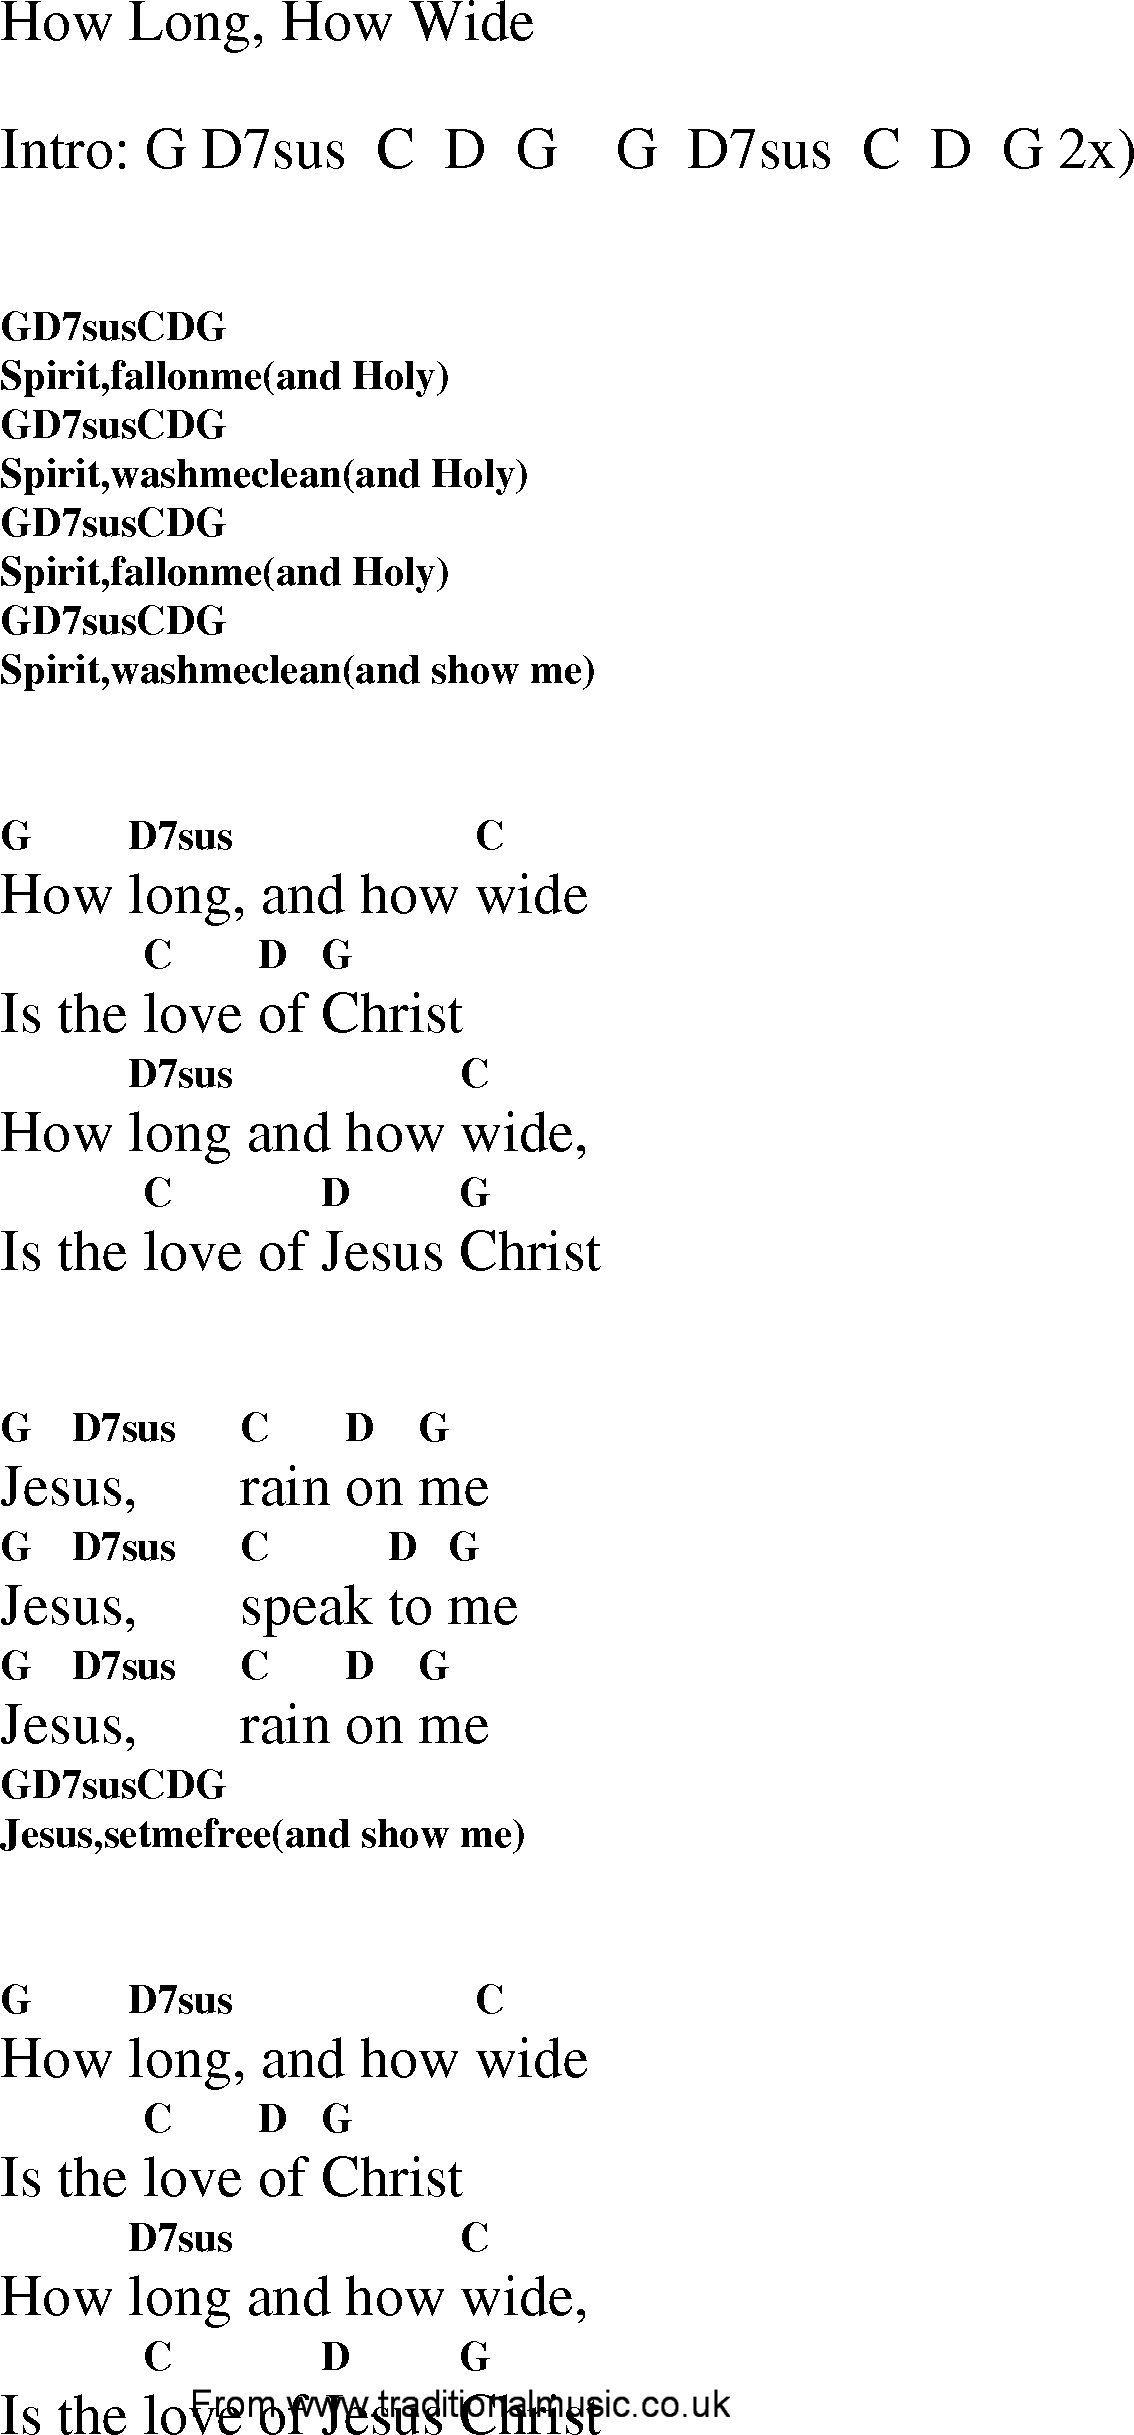 Gospel Song: how_long_how_wide, lyrics and chords.